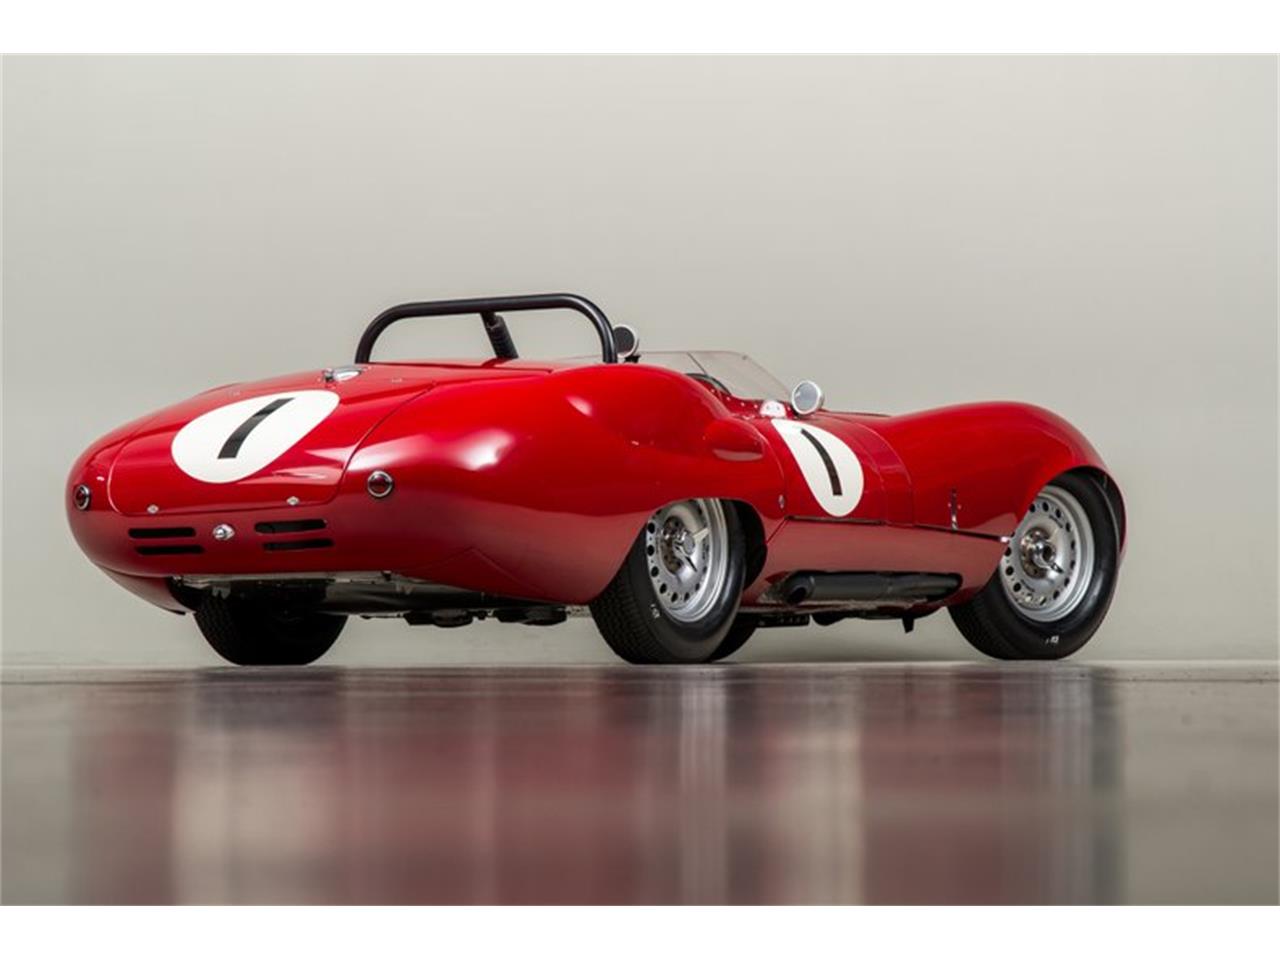 1959 Lister Roadster Replica for sale in Scotts Valley, CA – photo 72